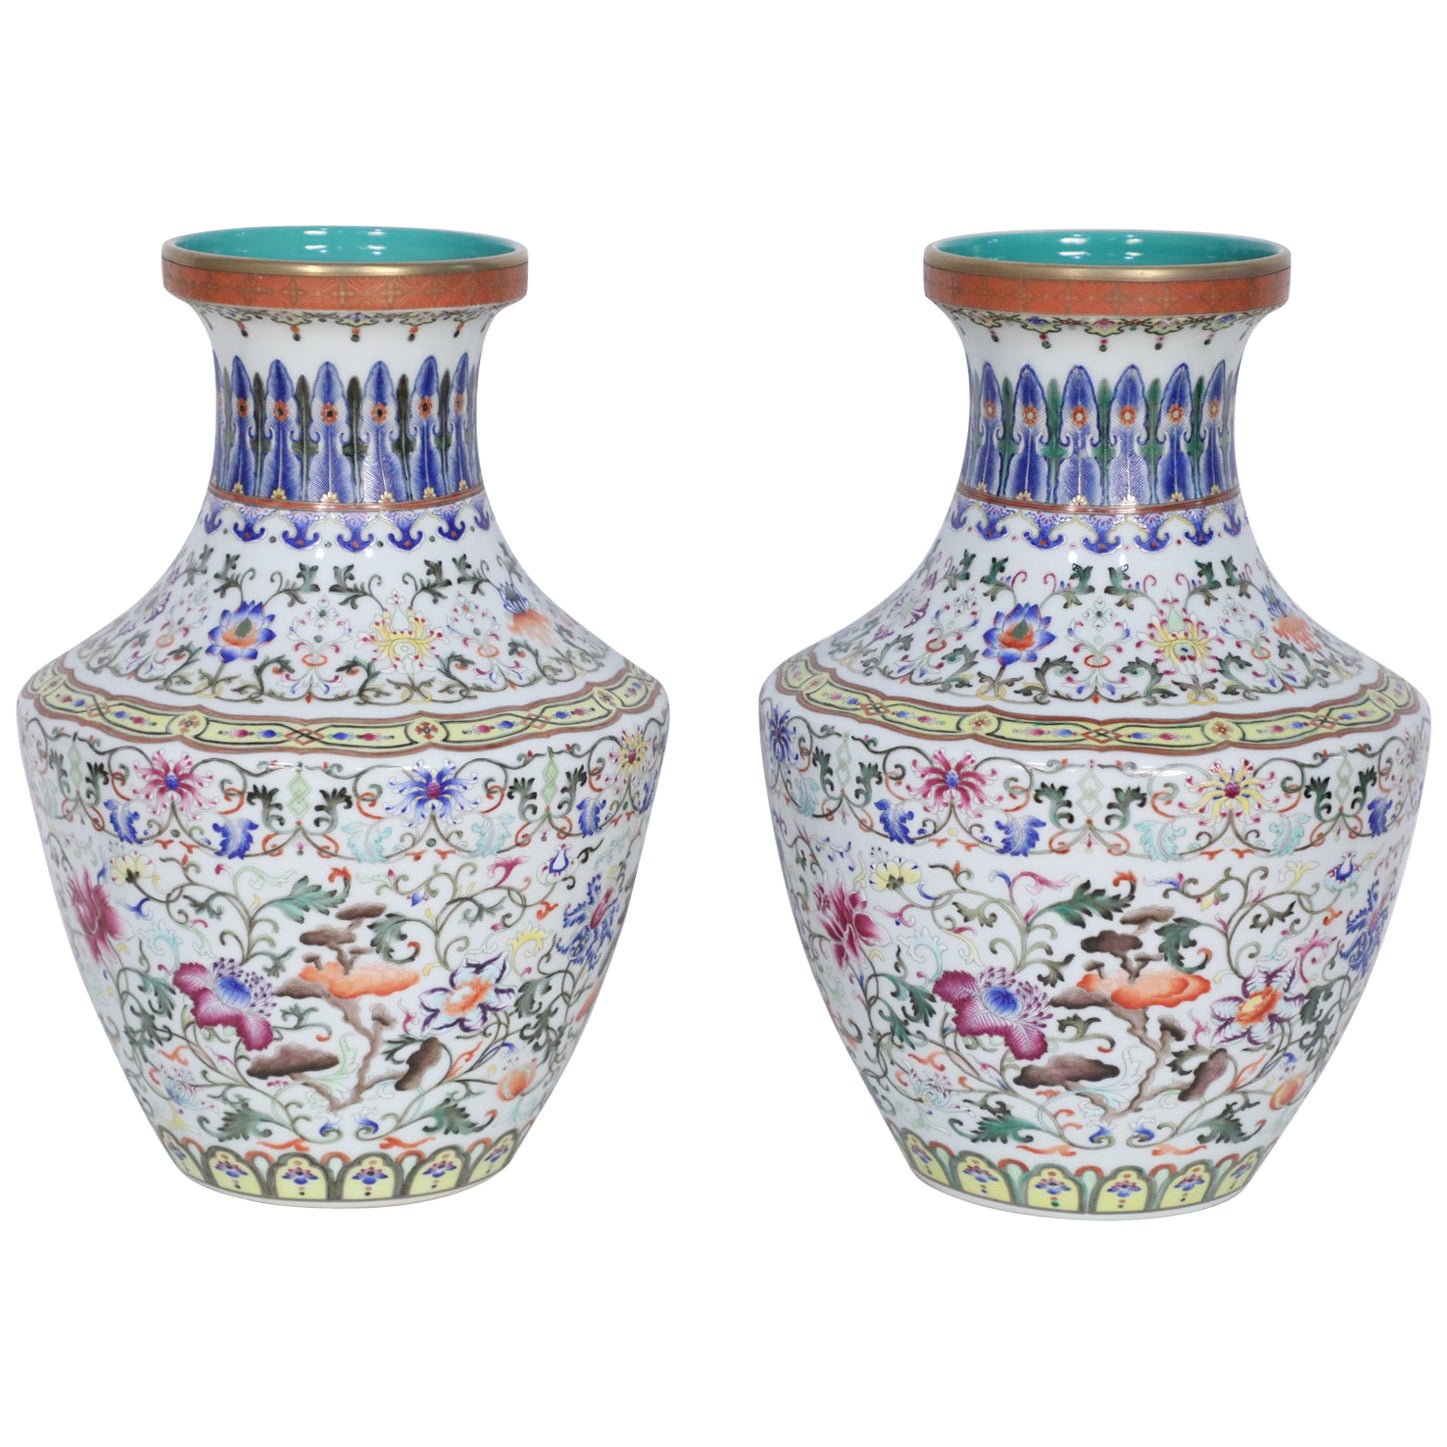 Pair of Chinese Multi-Color Pattern Porcelain Vases